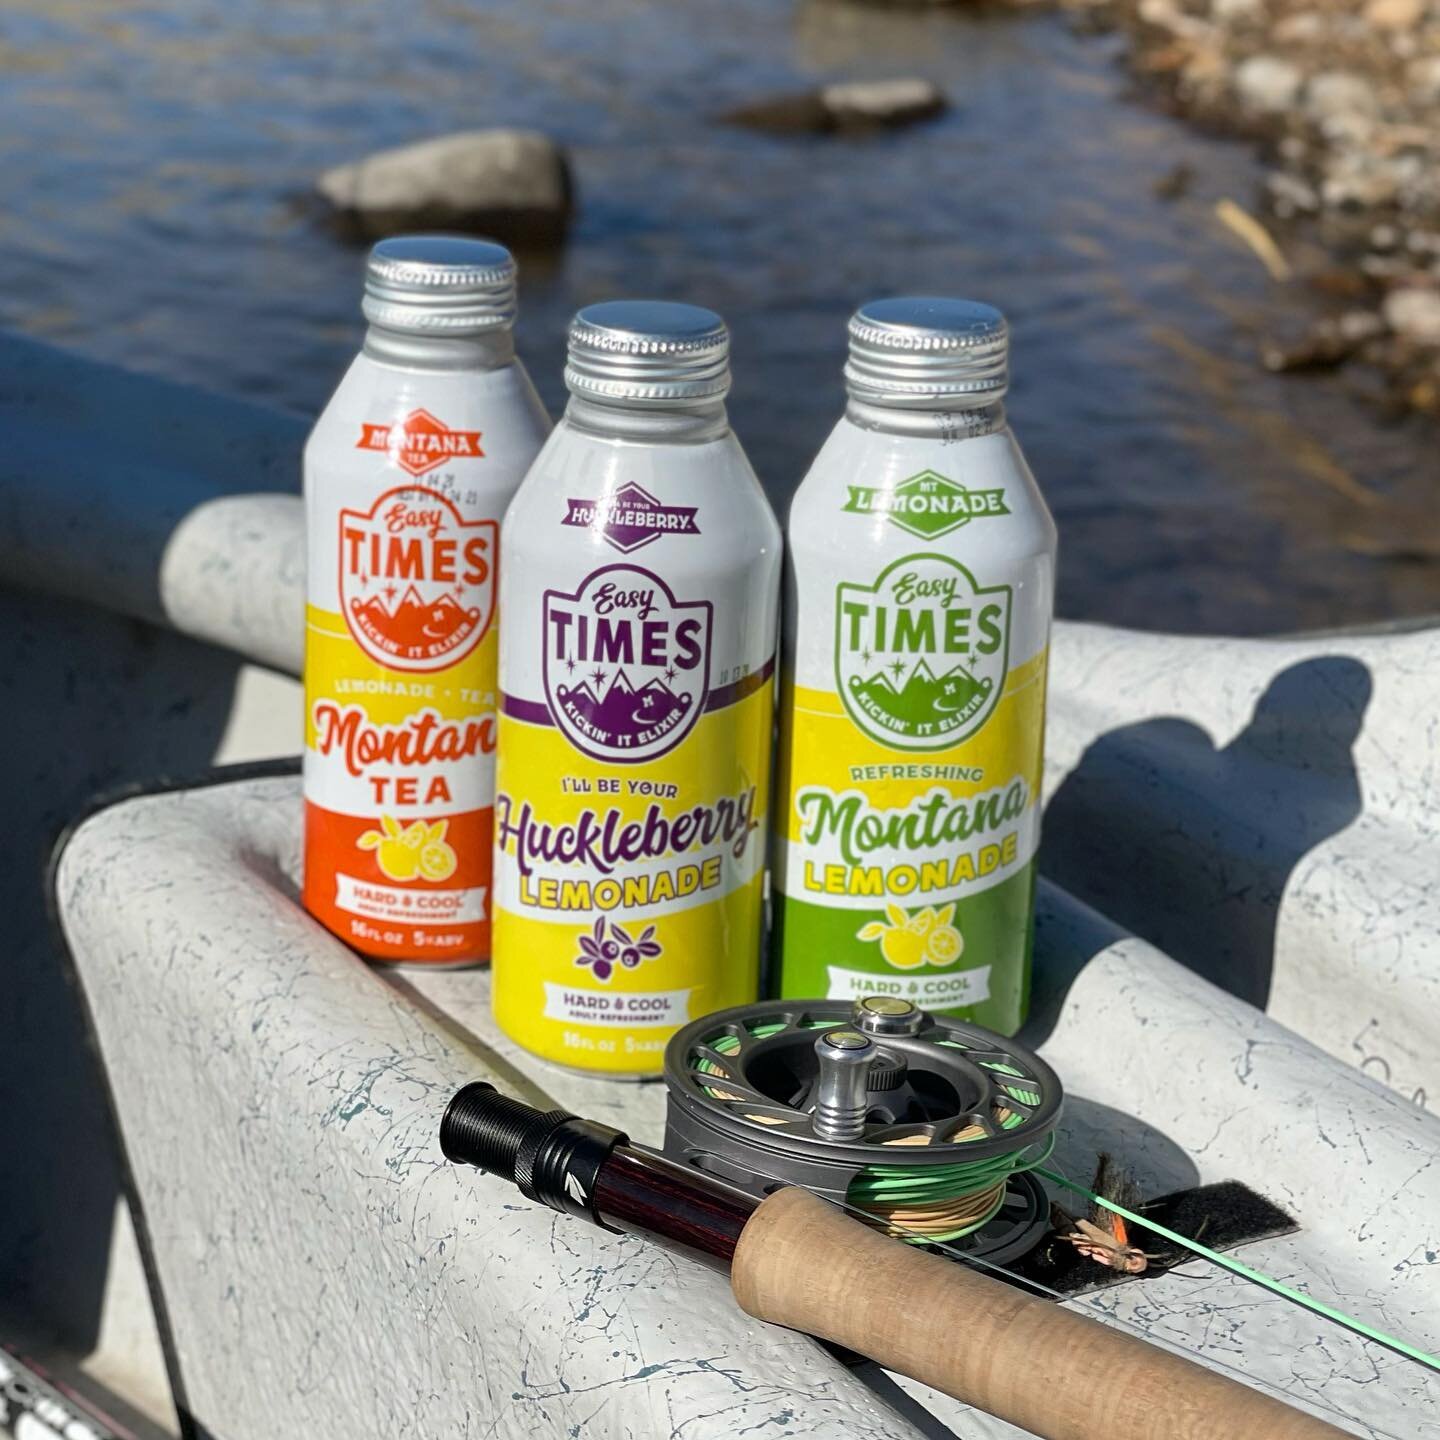 When the sun is out and the fishing slows down, you know what to grab out of the cooler! #drinkeasytimes

#illbeyourhuckleberry #lemonade #huckleberry #tea #montanatea #easytimes #kickinitelixer #flyfishing #driftboat #roboat  #drinklocal #montana #r